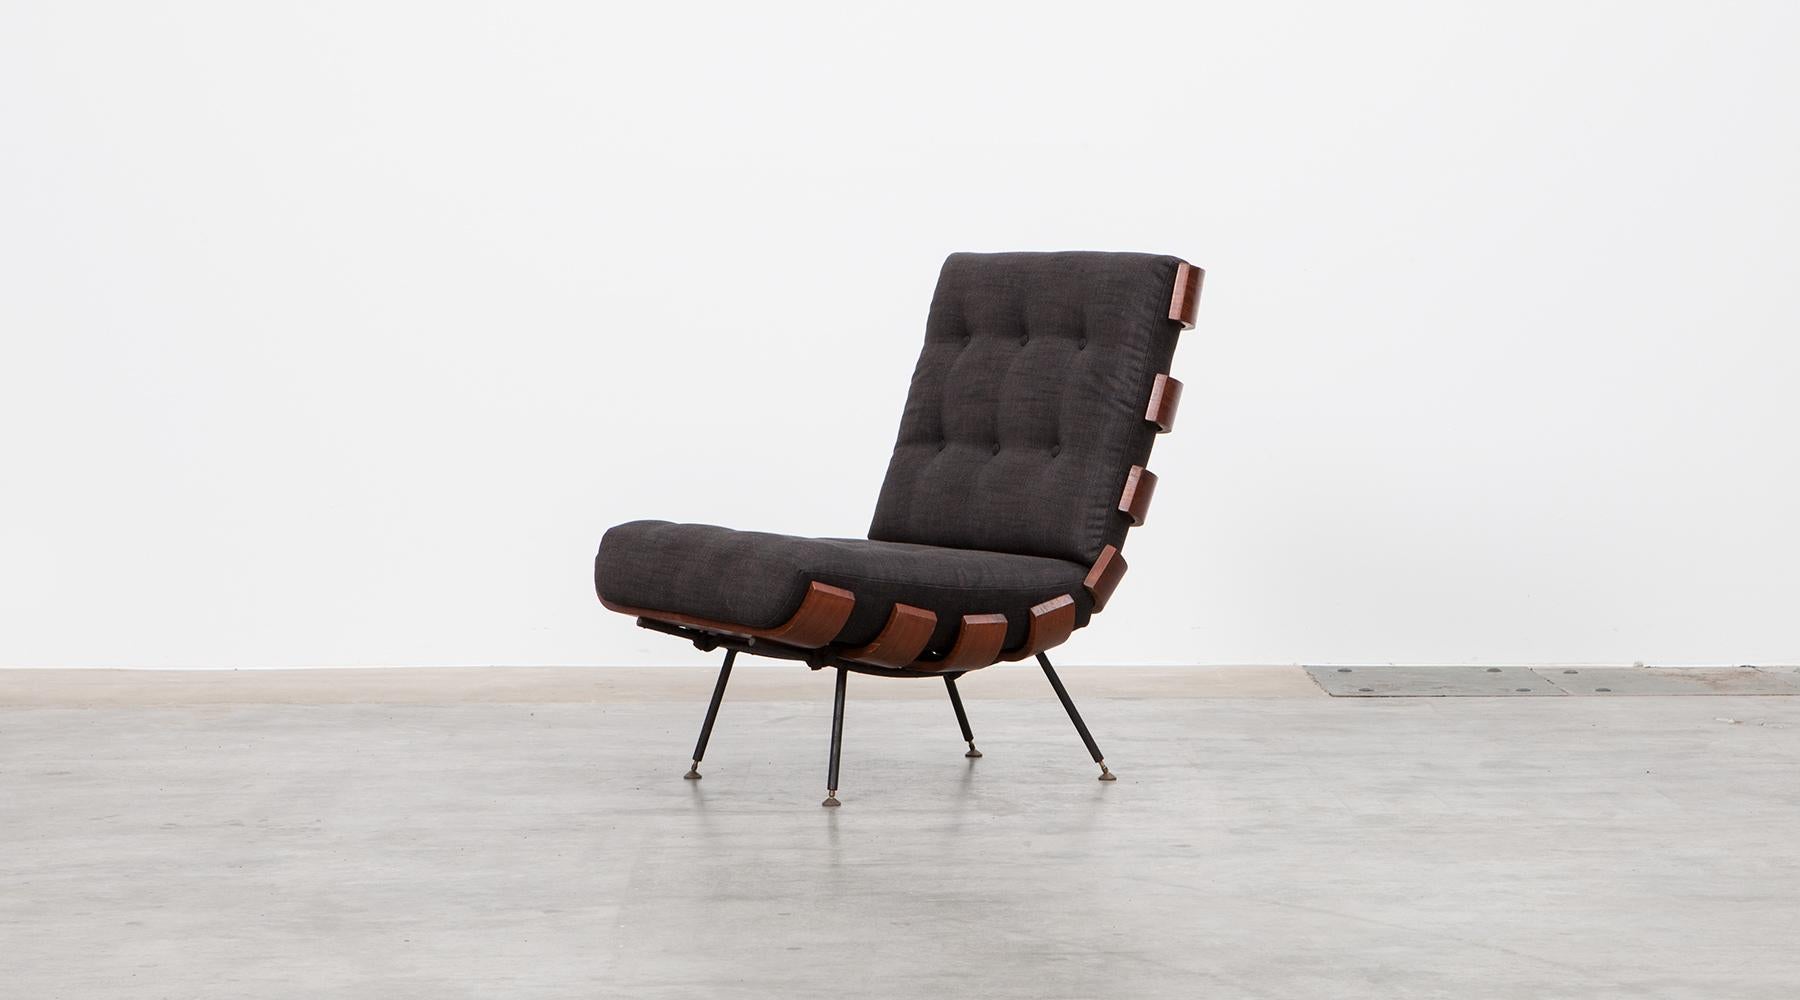 Wonderful Brazilian lounge chair designed by Martin Eisler and Carlo Hauner. The chair has been produced in teak and plywood slats bent elegant to the ends and stands on a black lacquered metal frame with brass feet. The cushions are recently newly